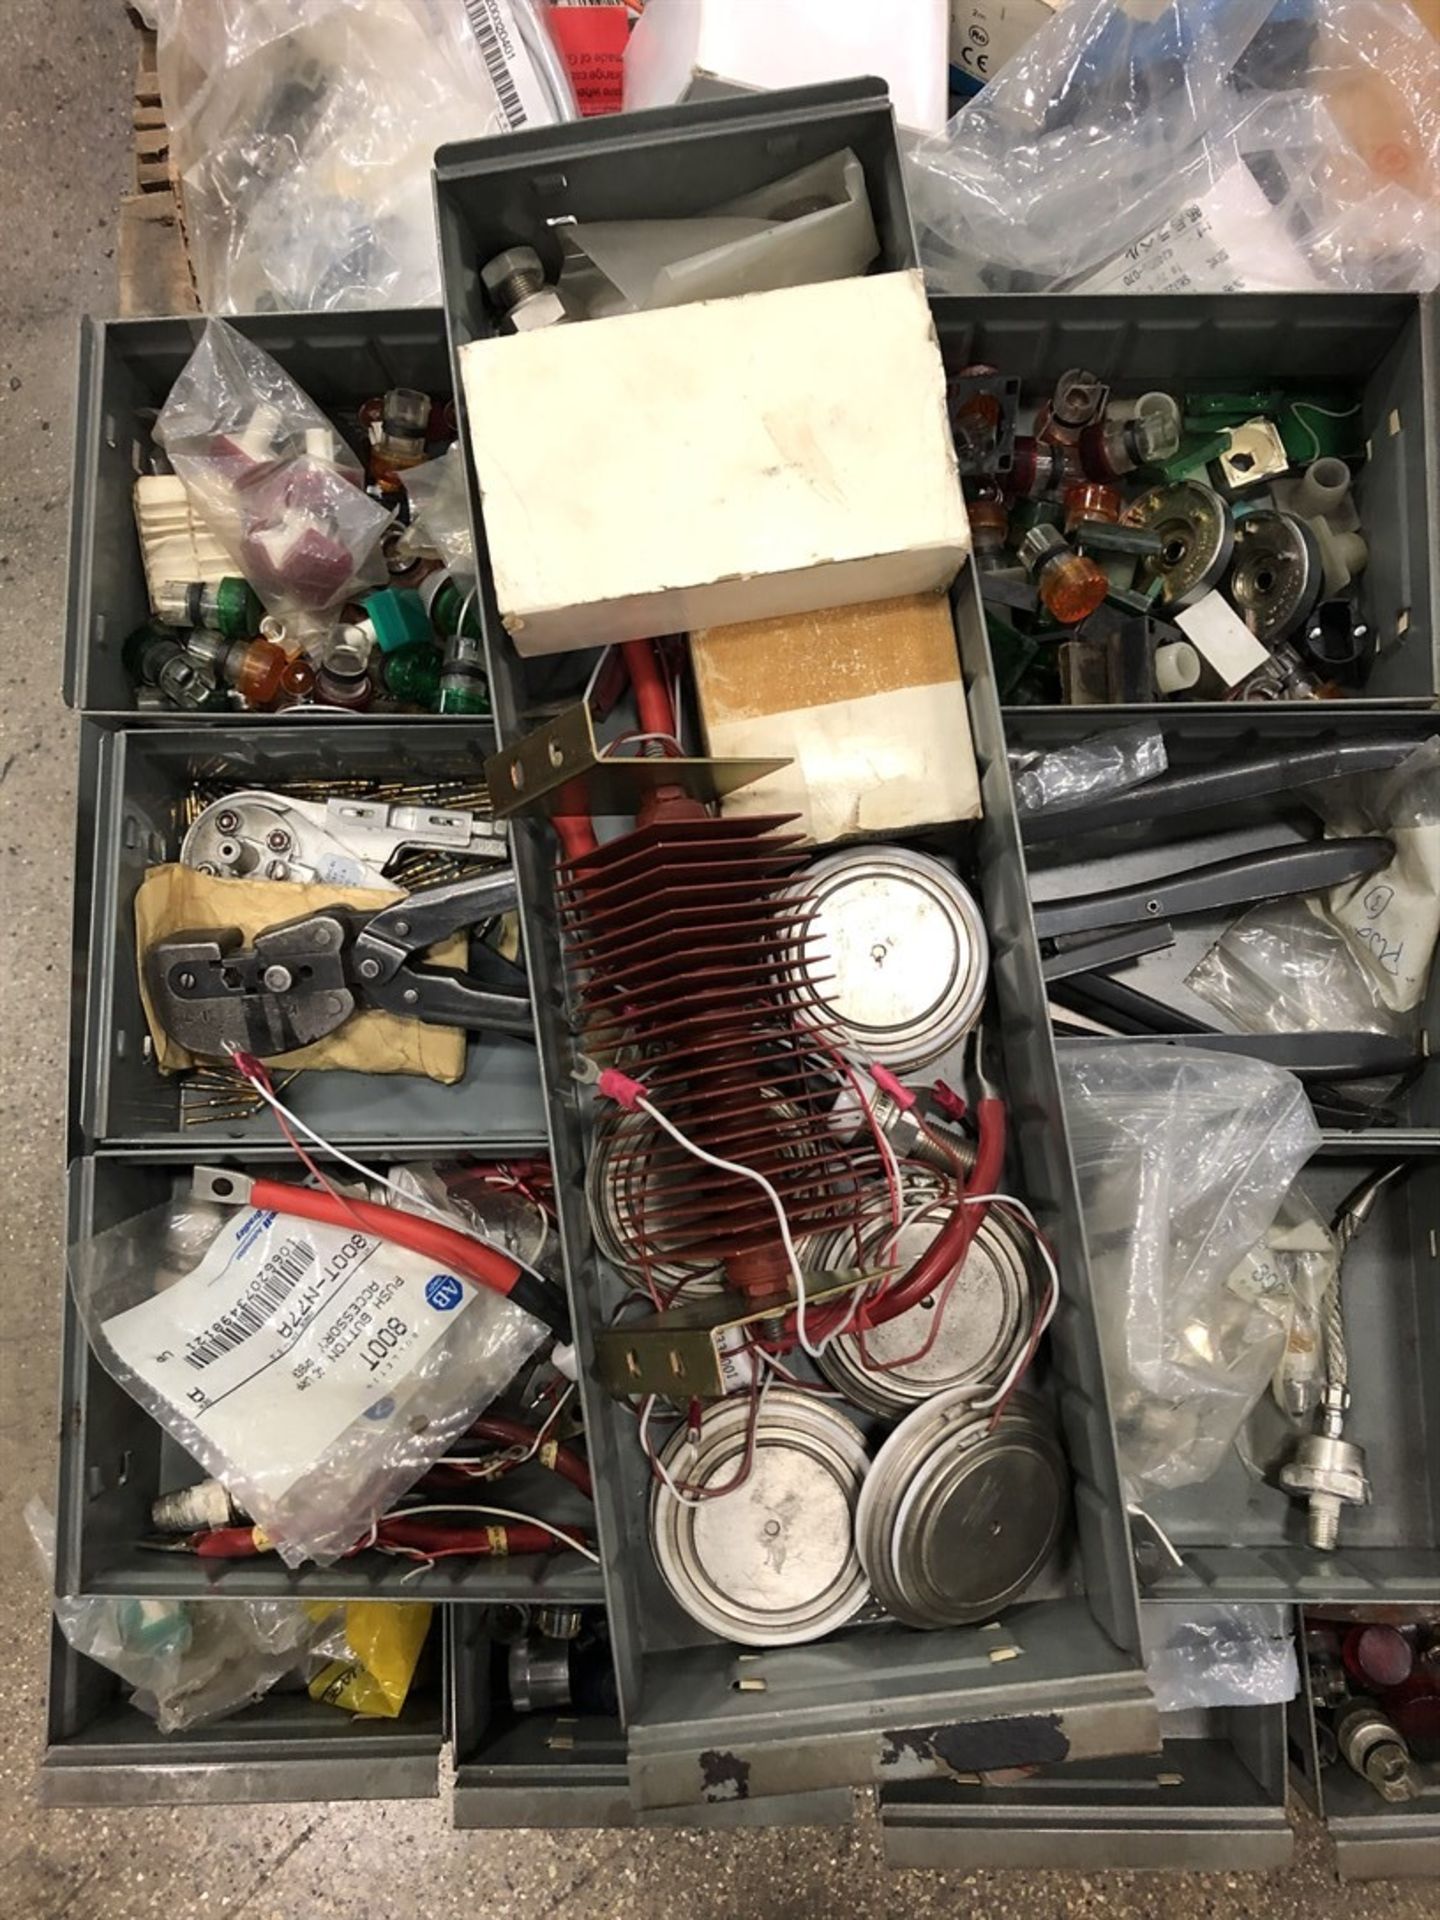 Lot Comprising Assorted Fluke and Okuma Parts and Components, (21L) - Image 2 of 3